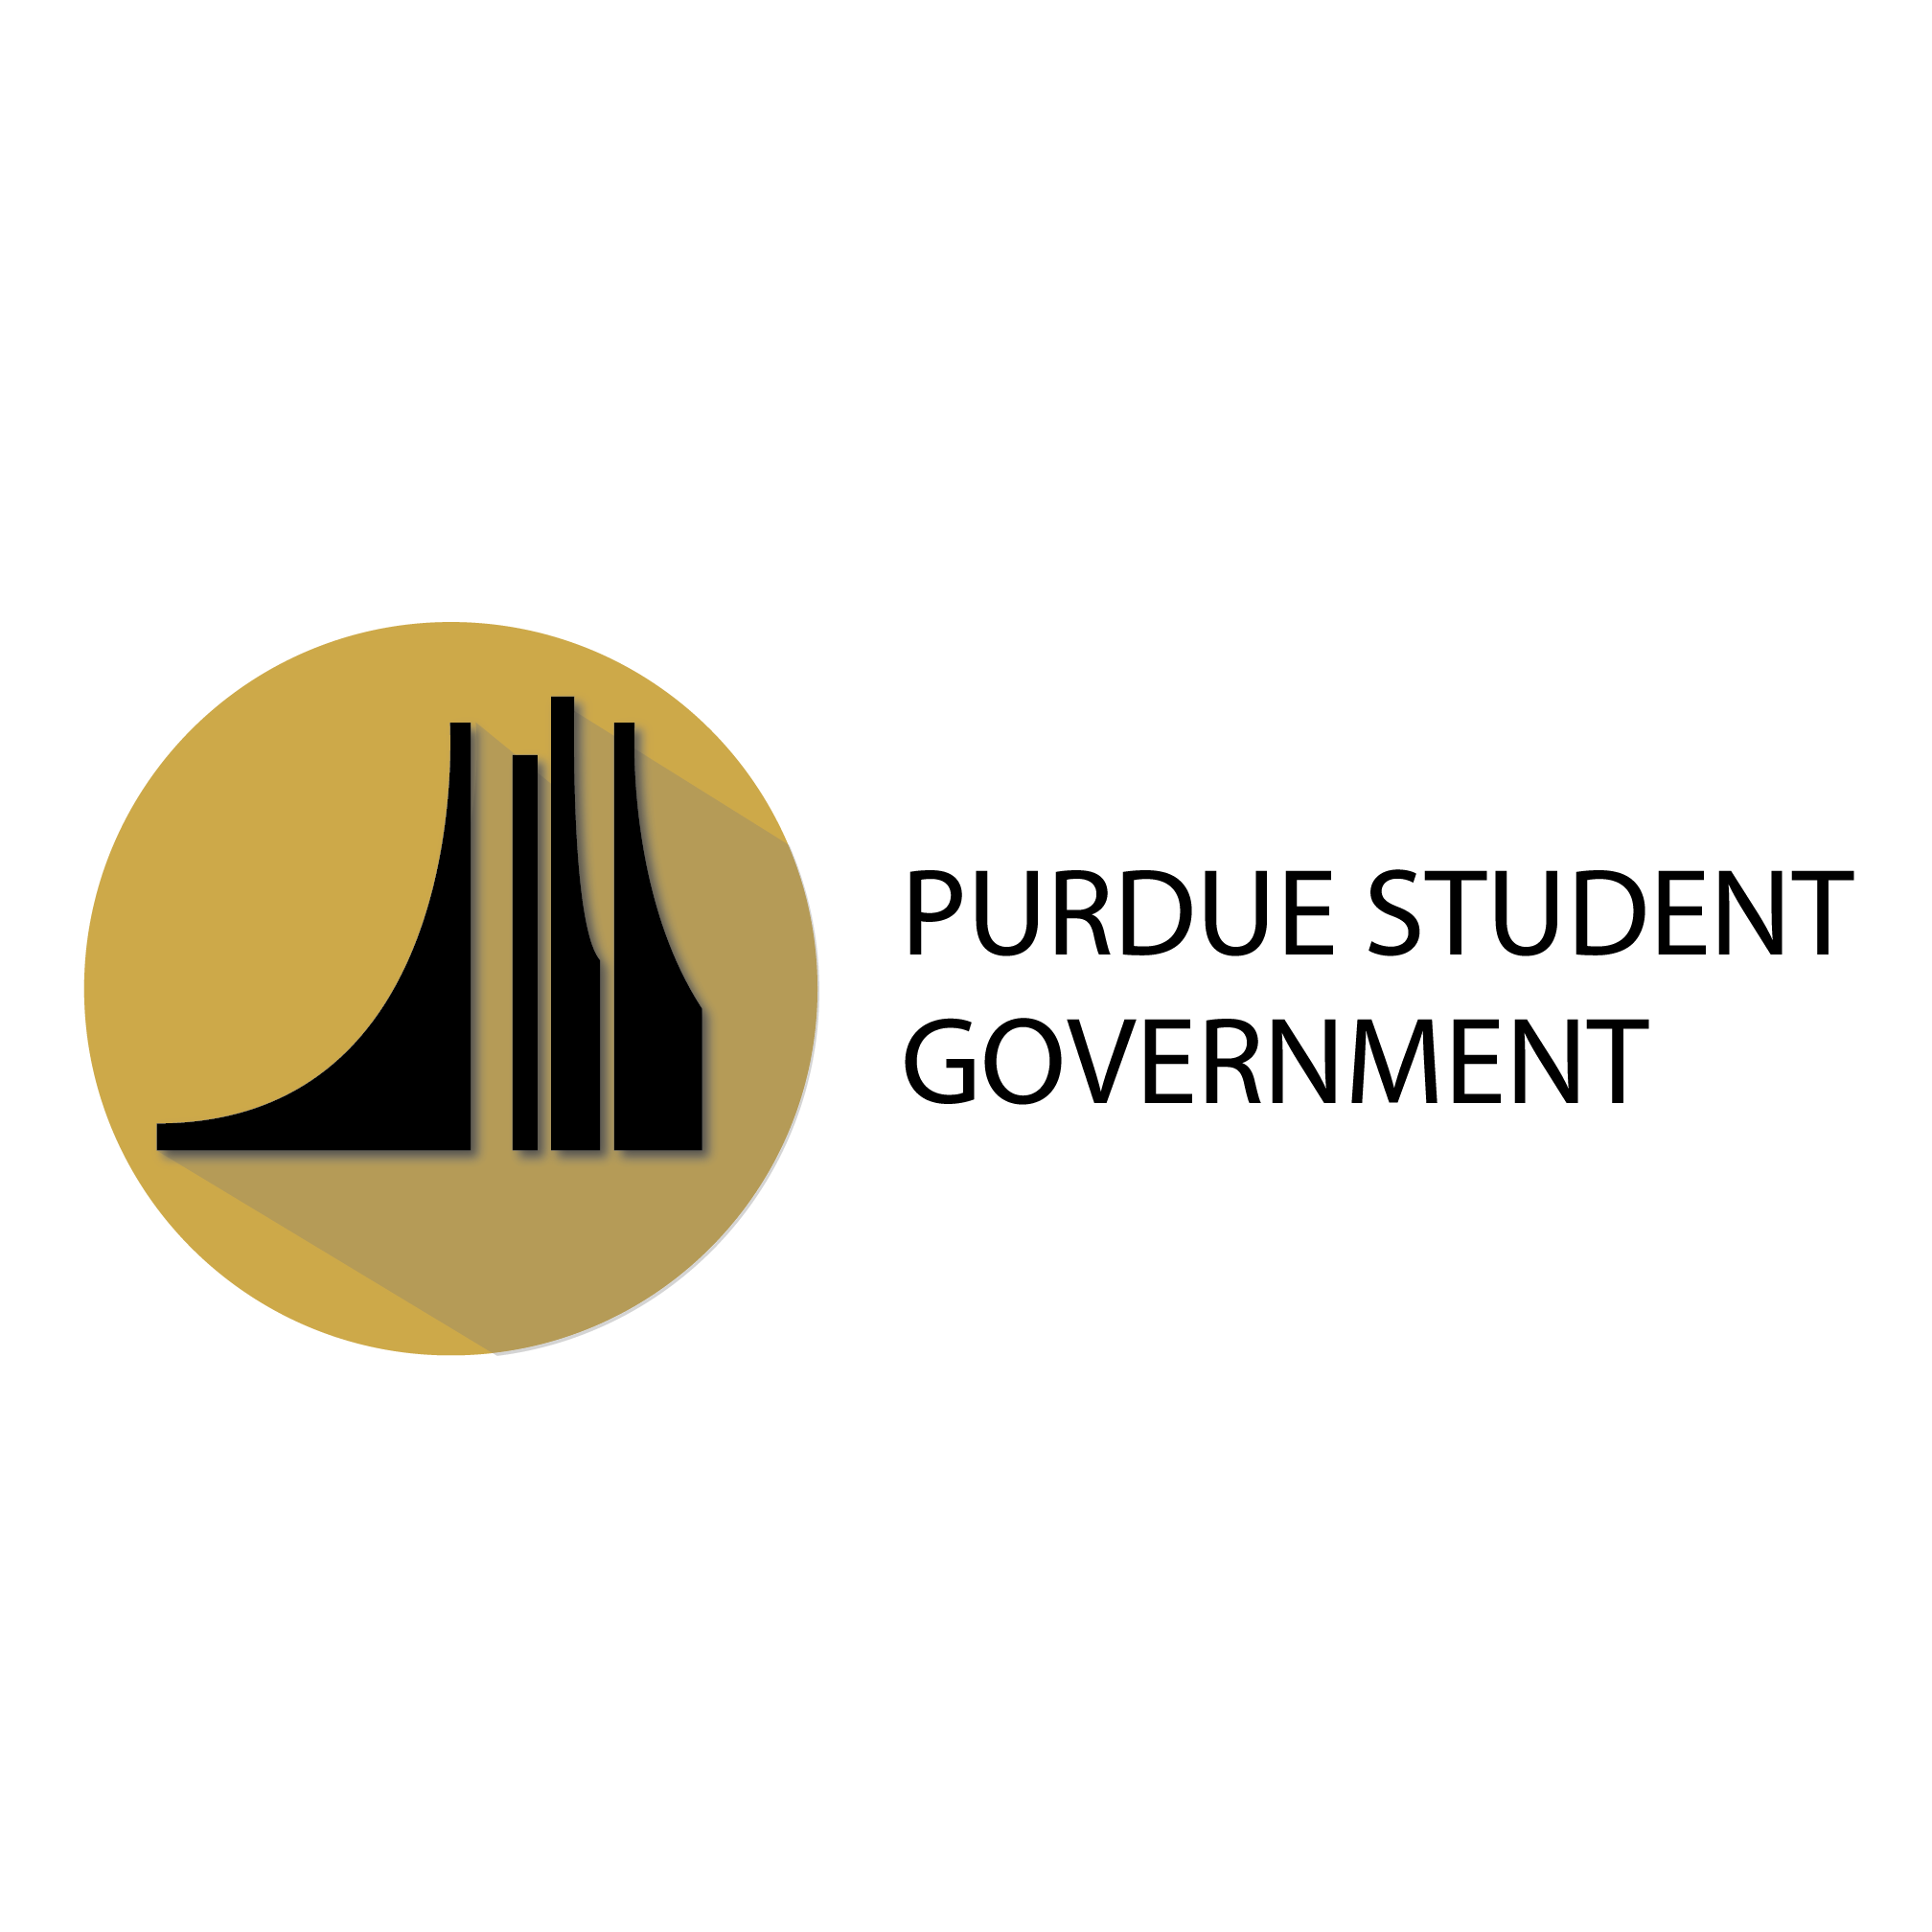 Purdue Student Government word mark